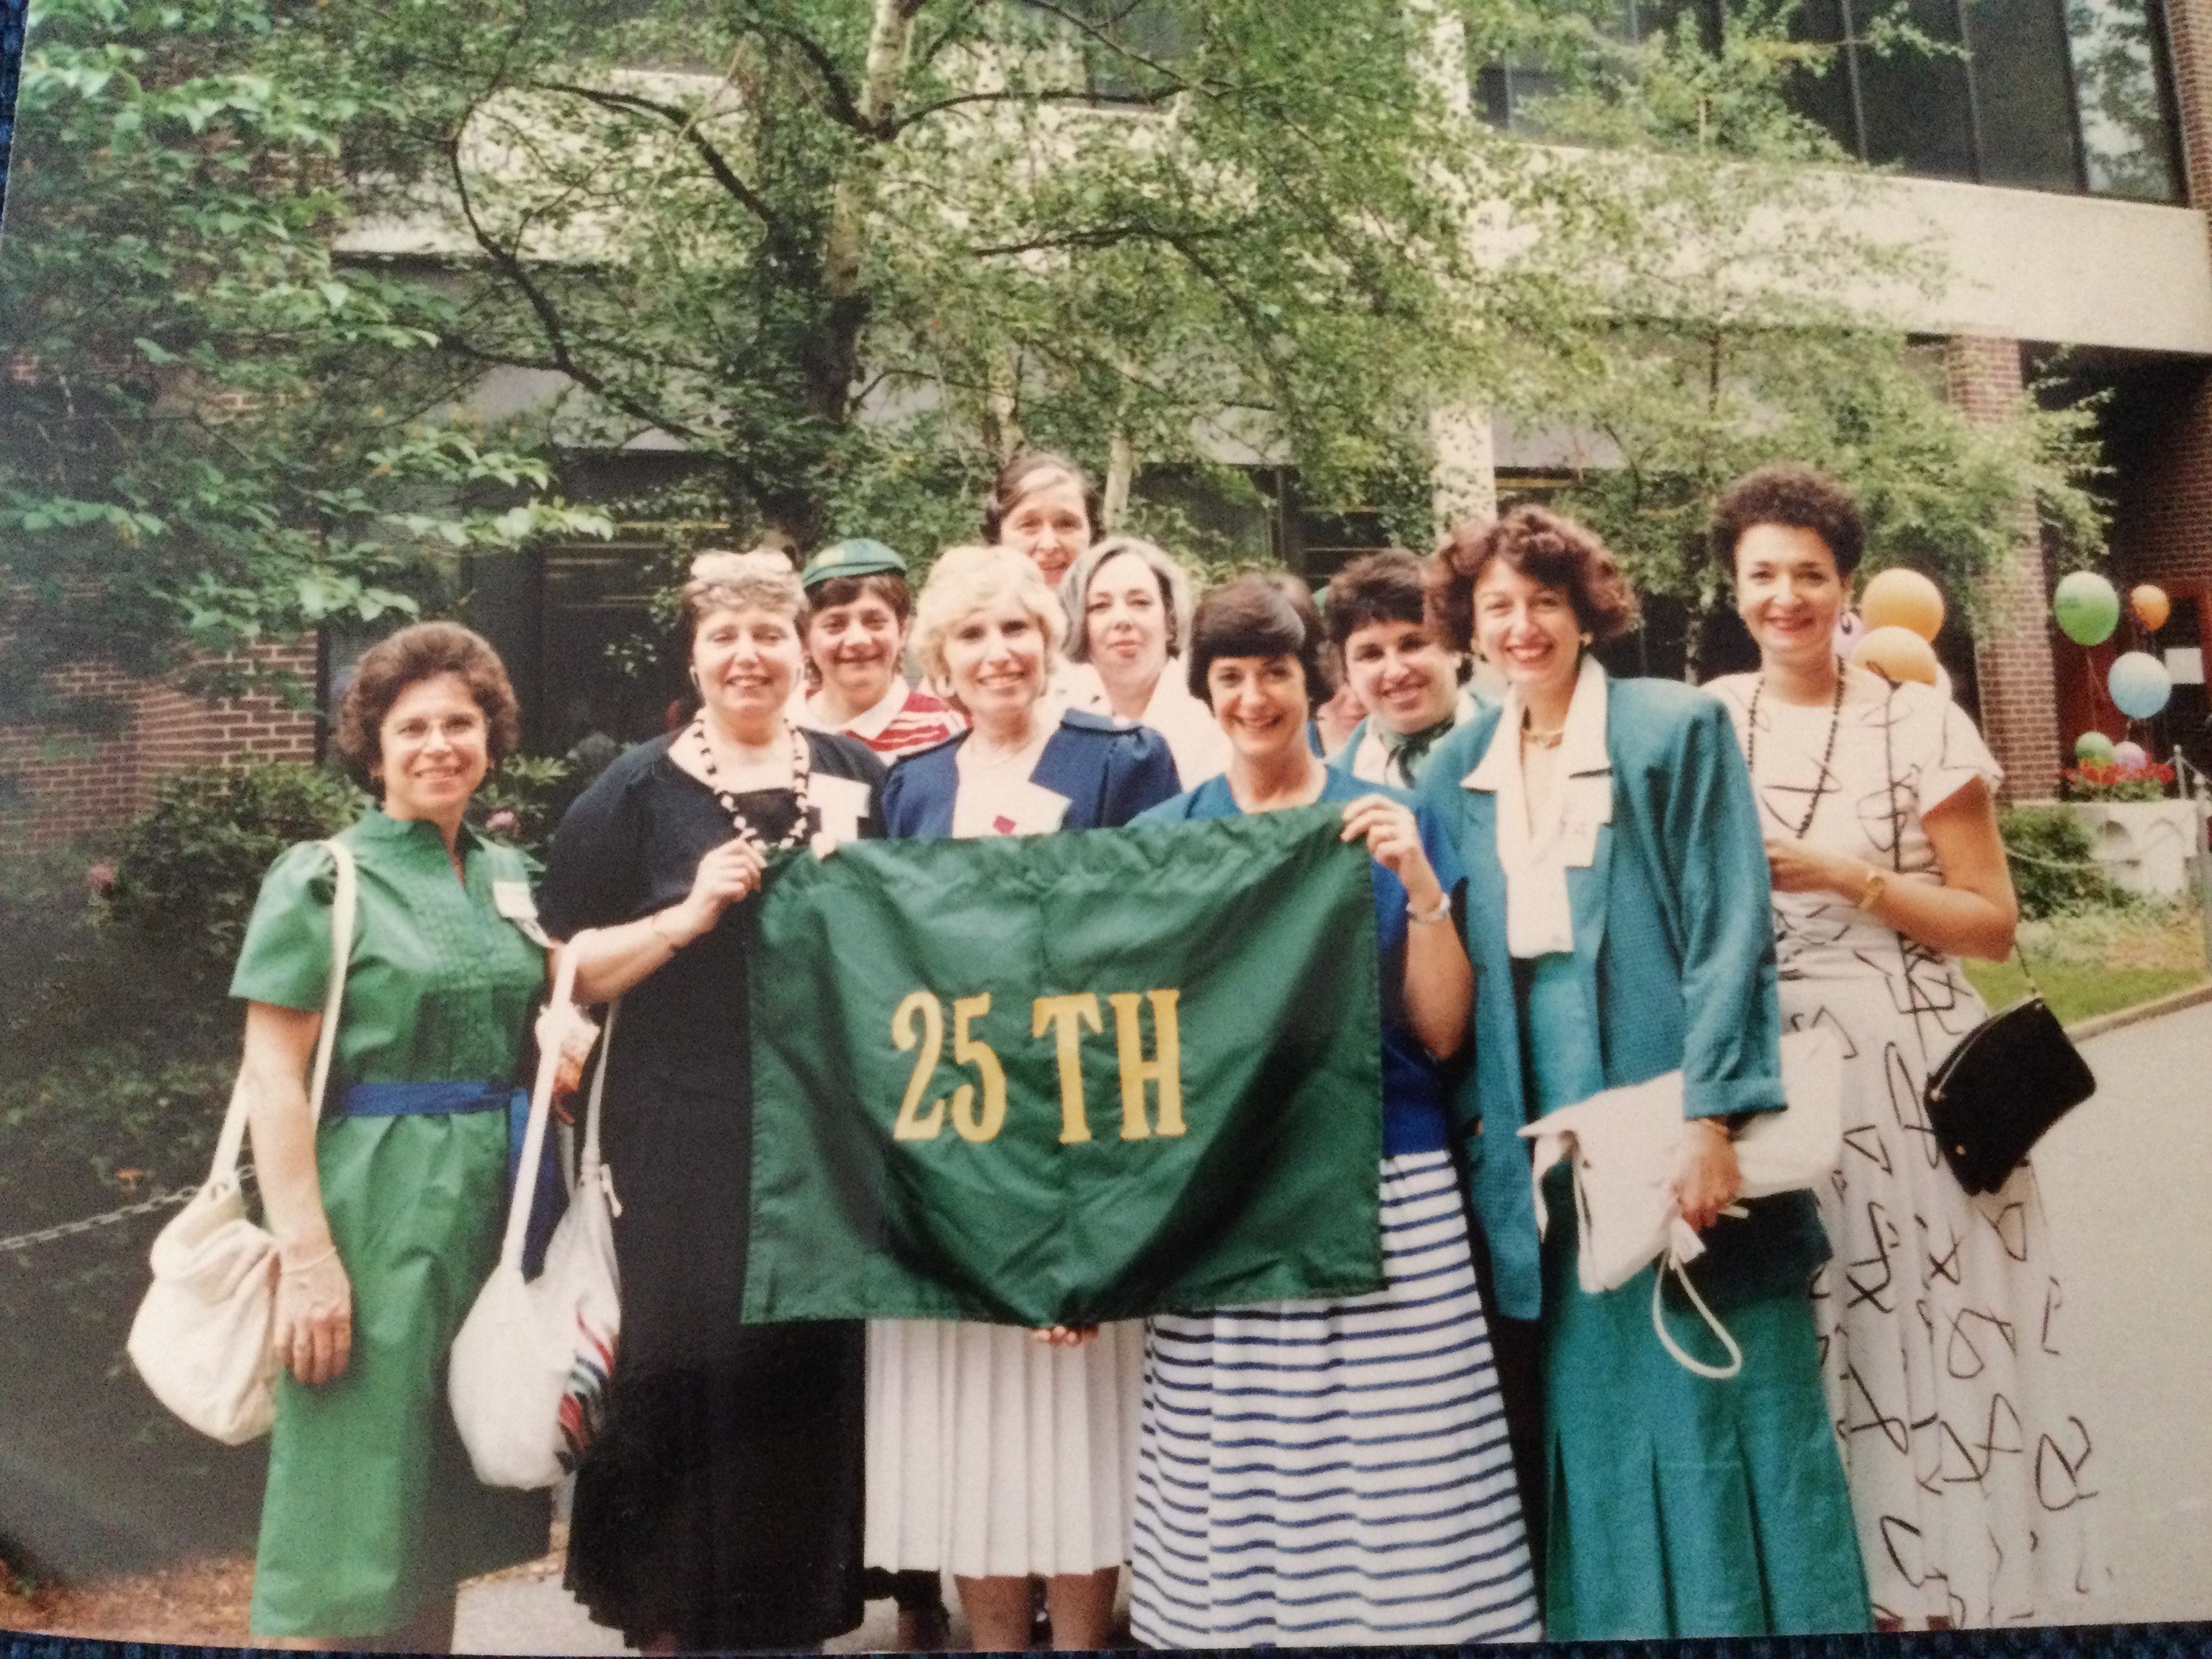 Alumni from the Class of 1961 celebrate their 25th reunion on the Doble Campus in 1986